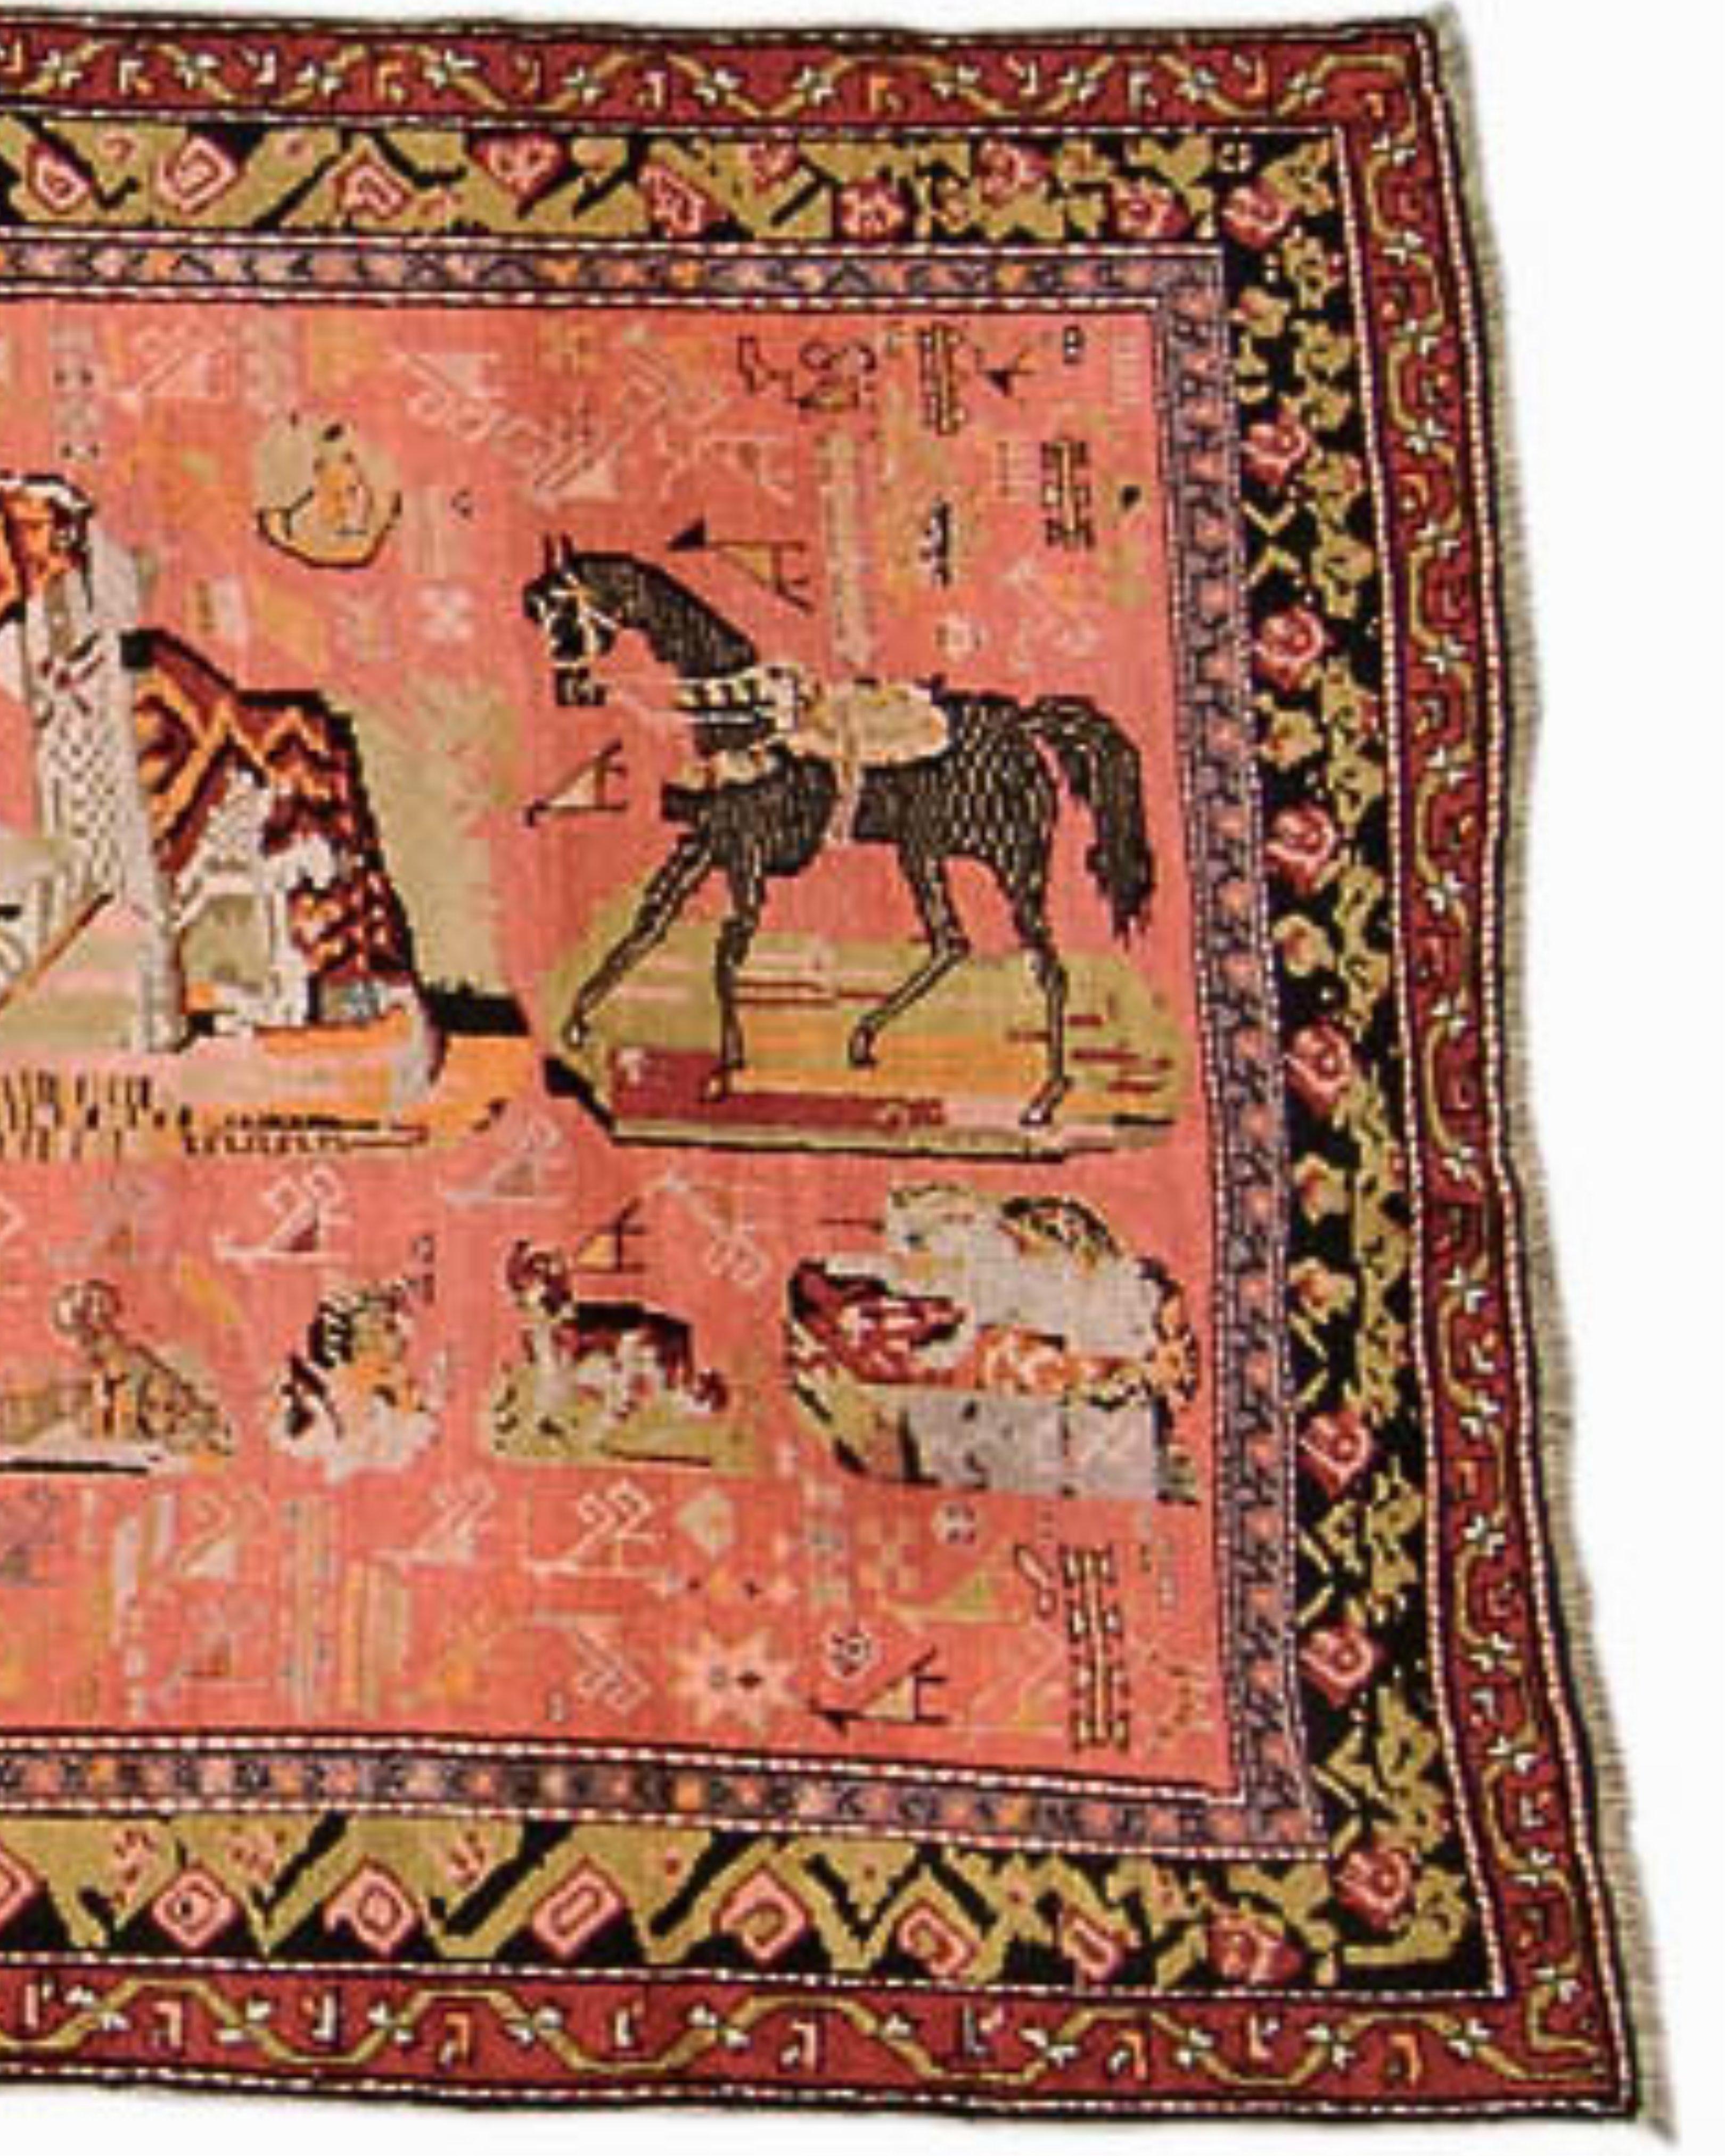 Antique Caucasian Pictoral Horse Karabagh Rug, Early 20th Century

Additional Information:
Dimensions: 4'7